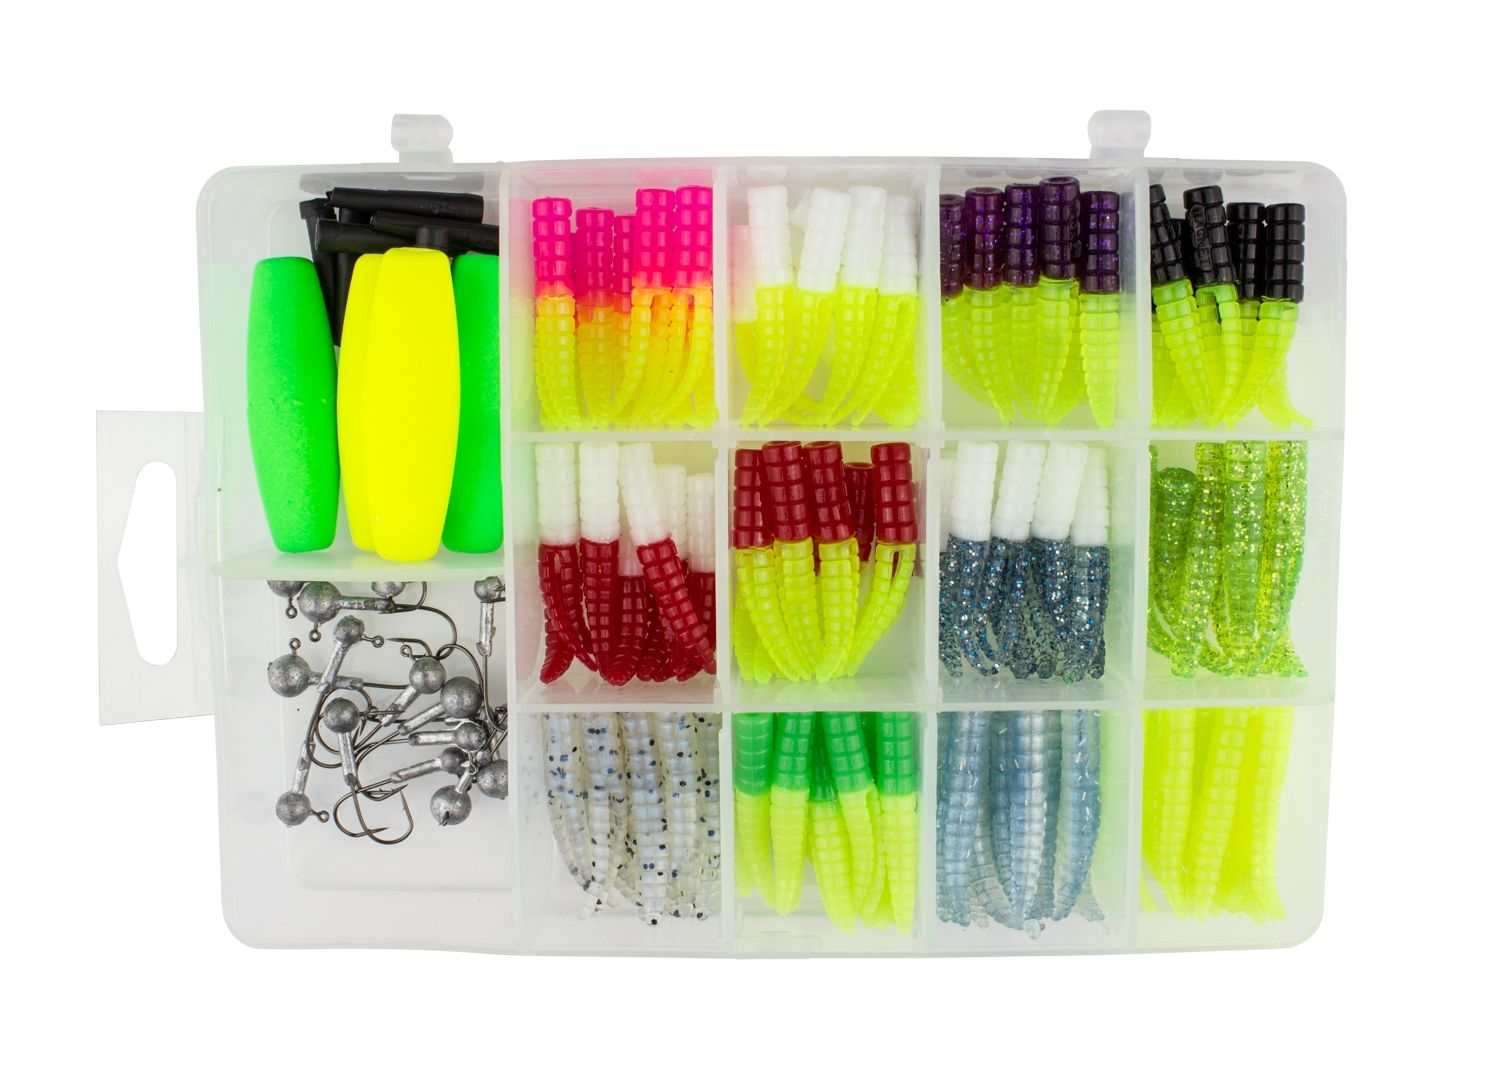 Leland Crappie Magnet Best of the Best Kit (13012)